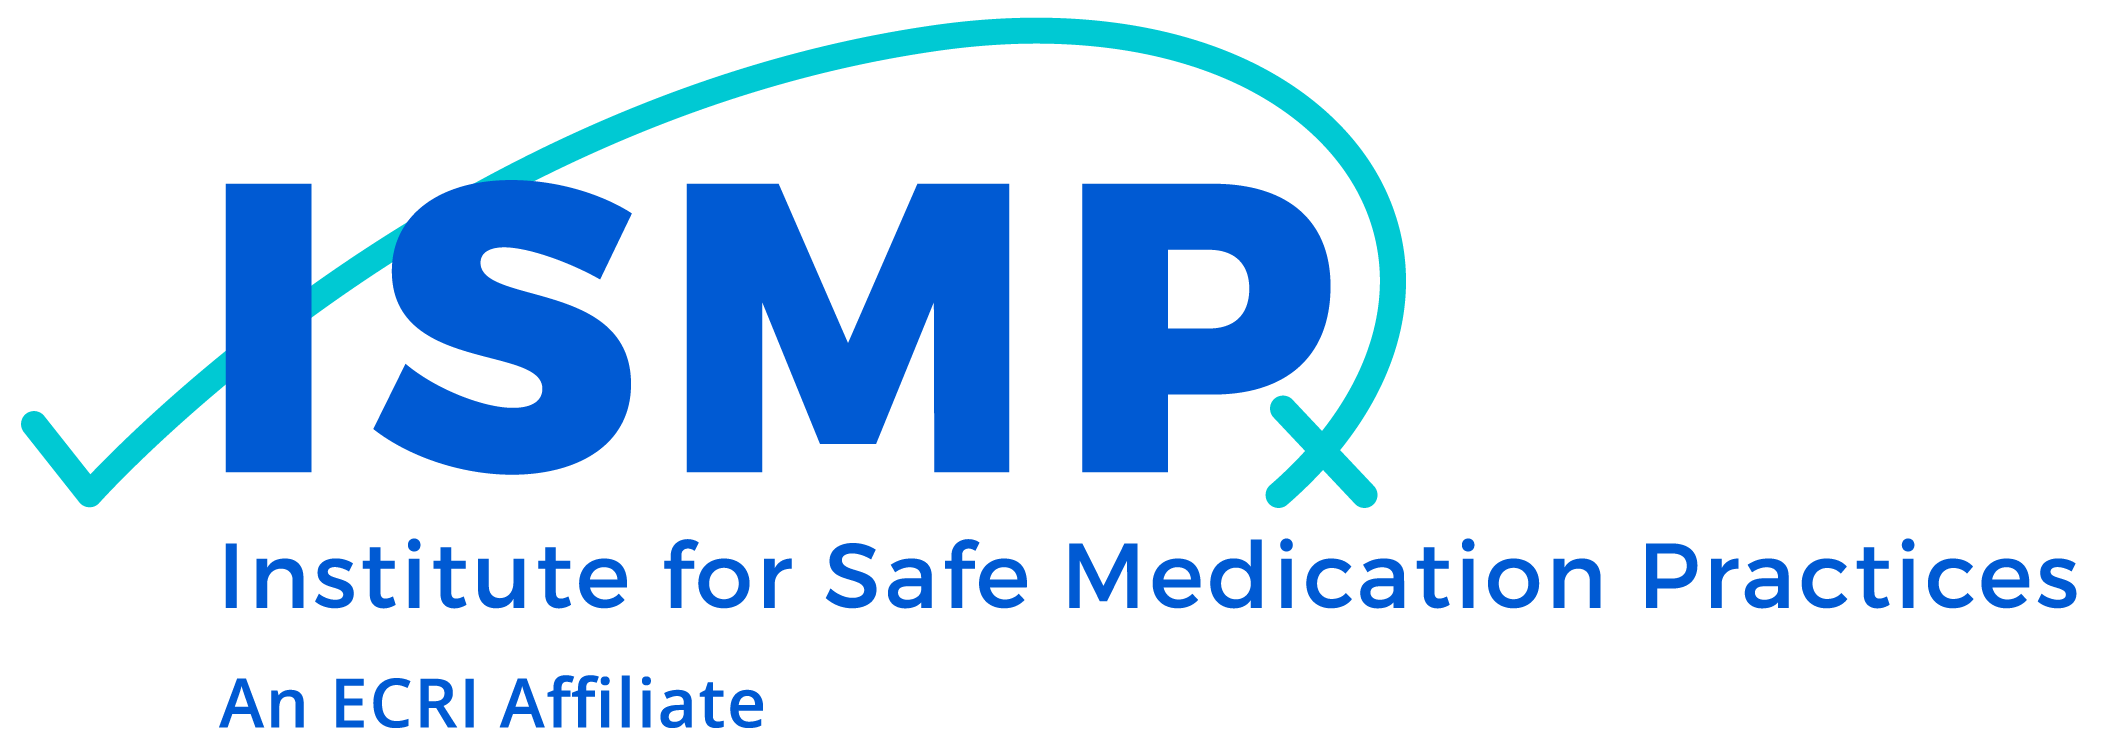 Institute for Safe Medication Practices (ISMP)